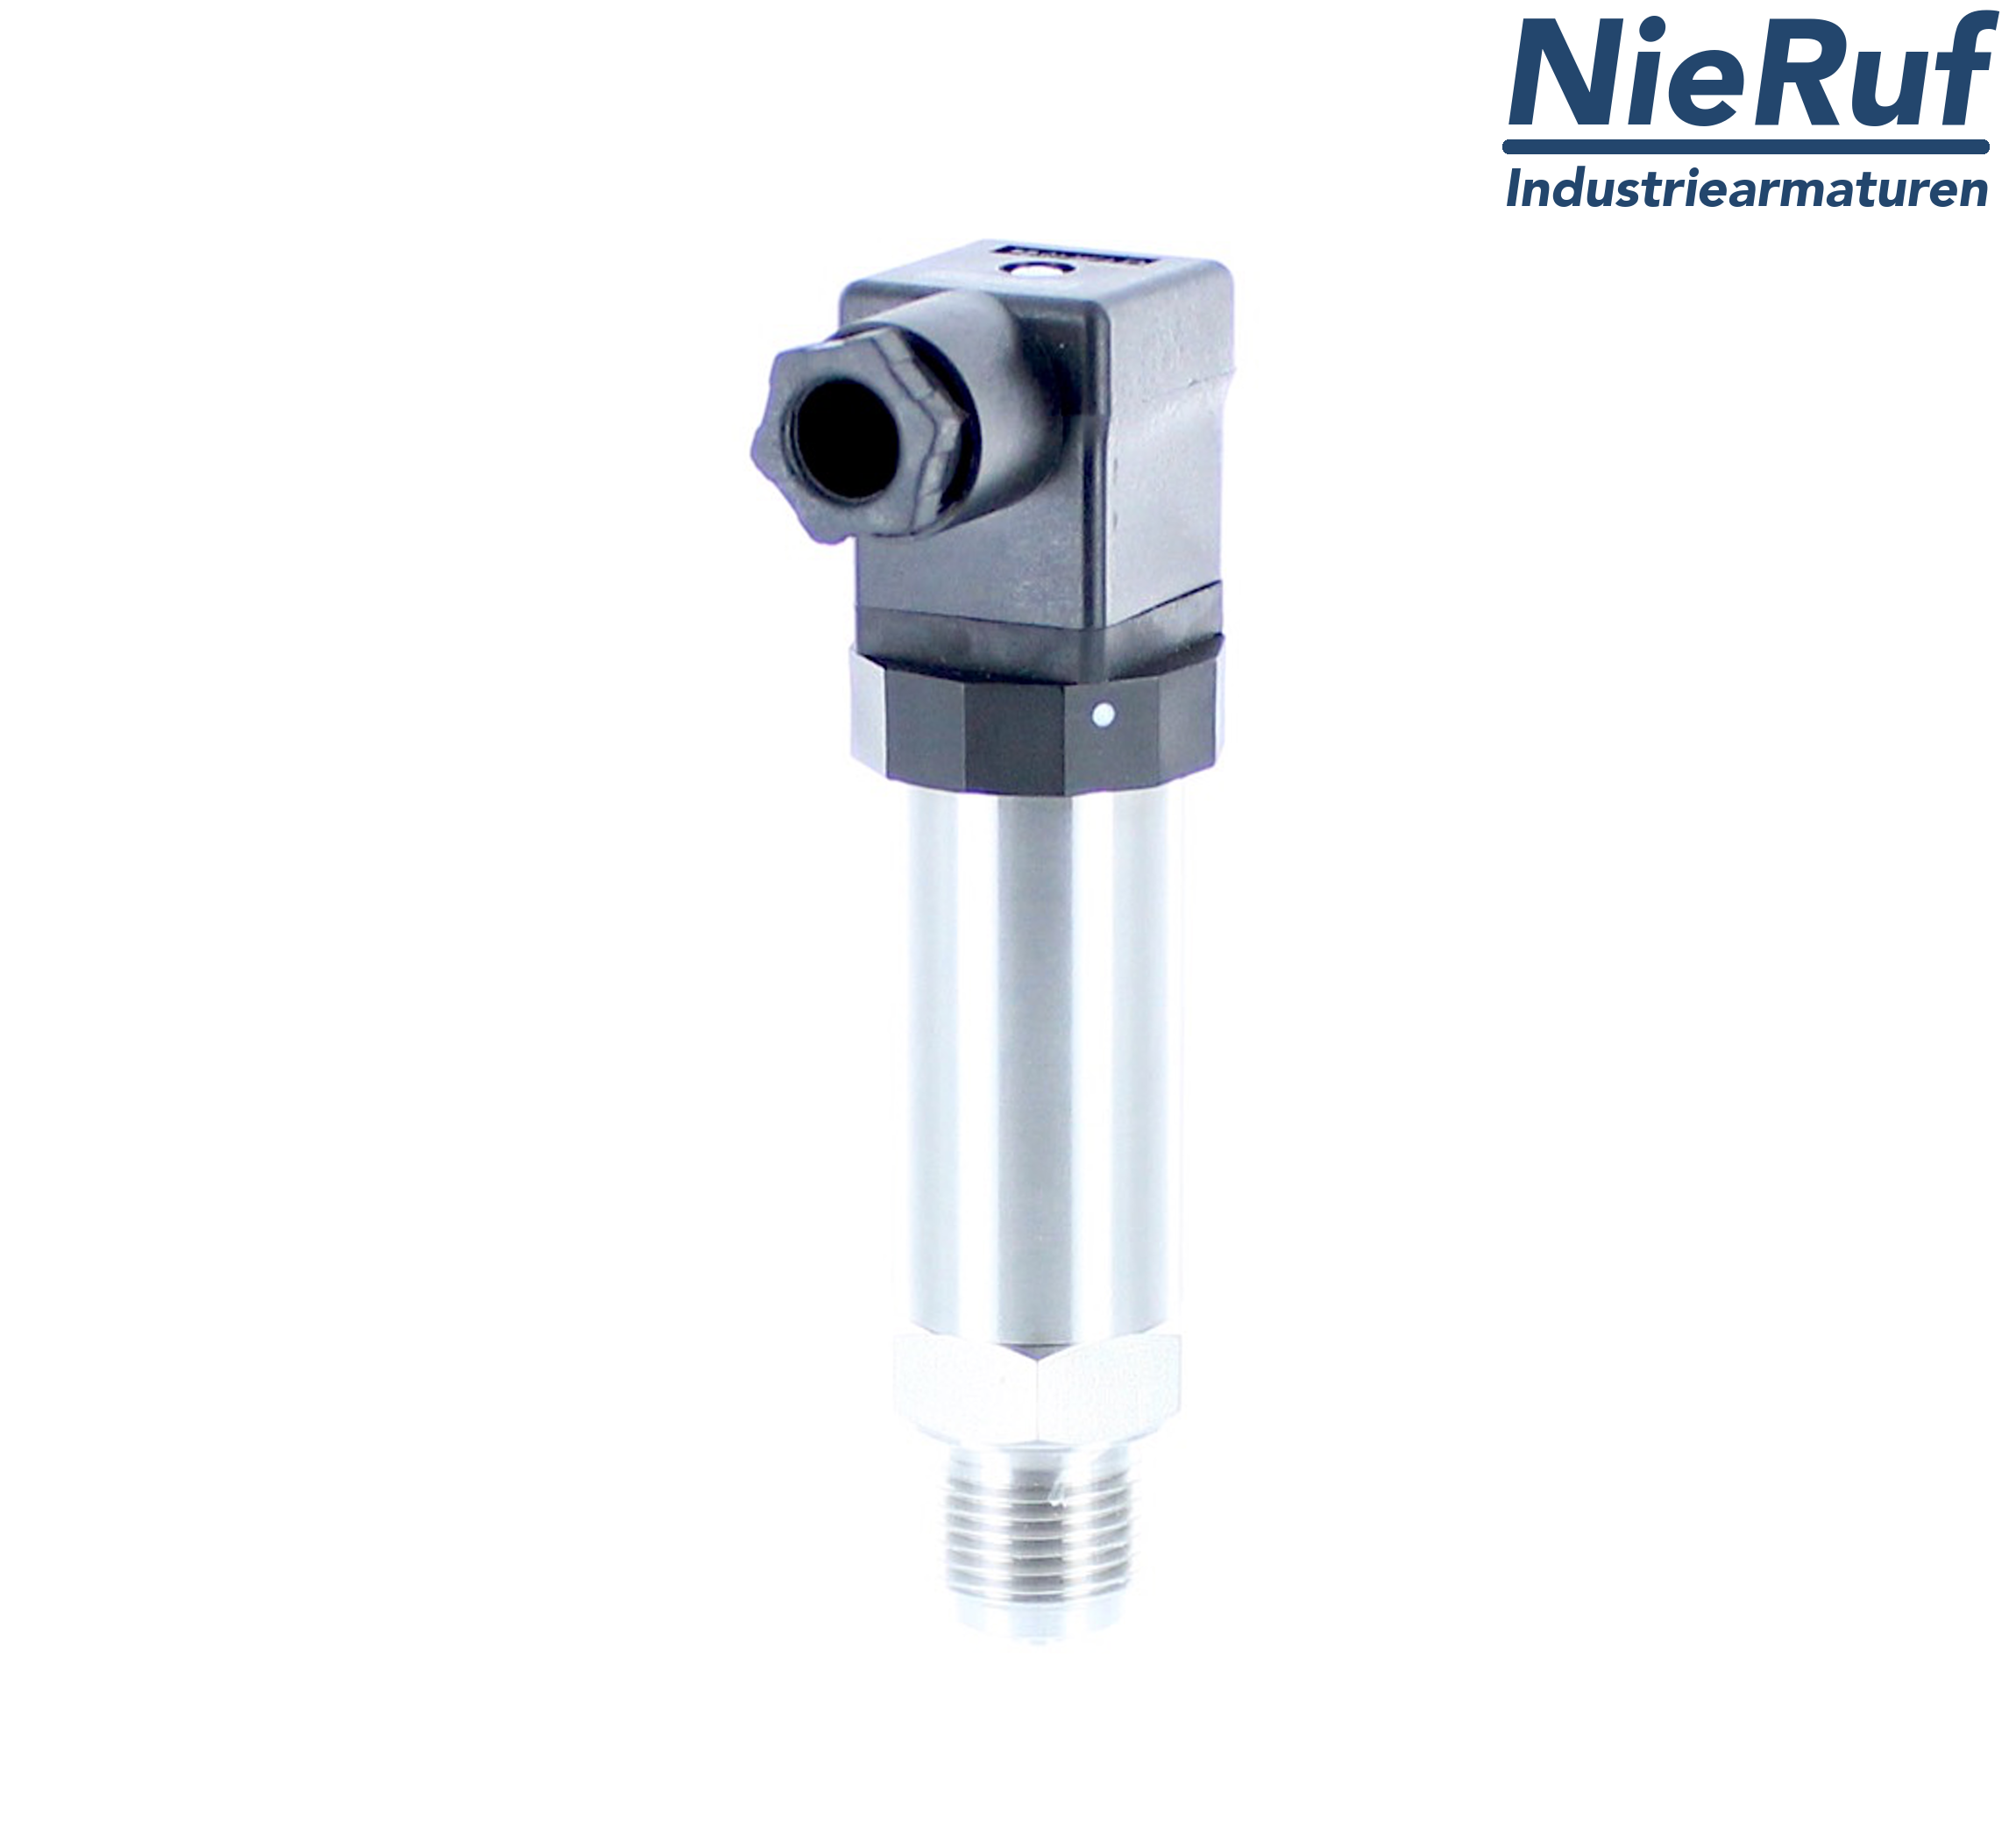 pressure sensor G 1/2" B DS01 stainless steel 2-wire: 4-20mA FPM 0,0 - 400,0 bar